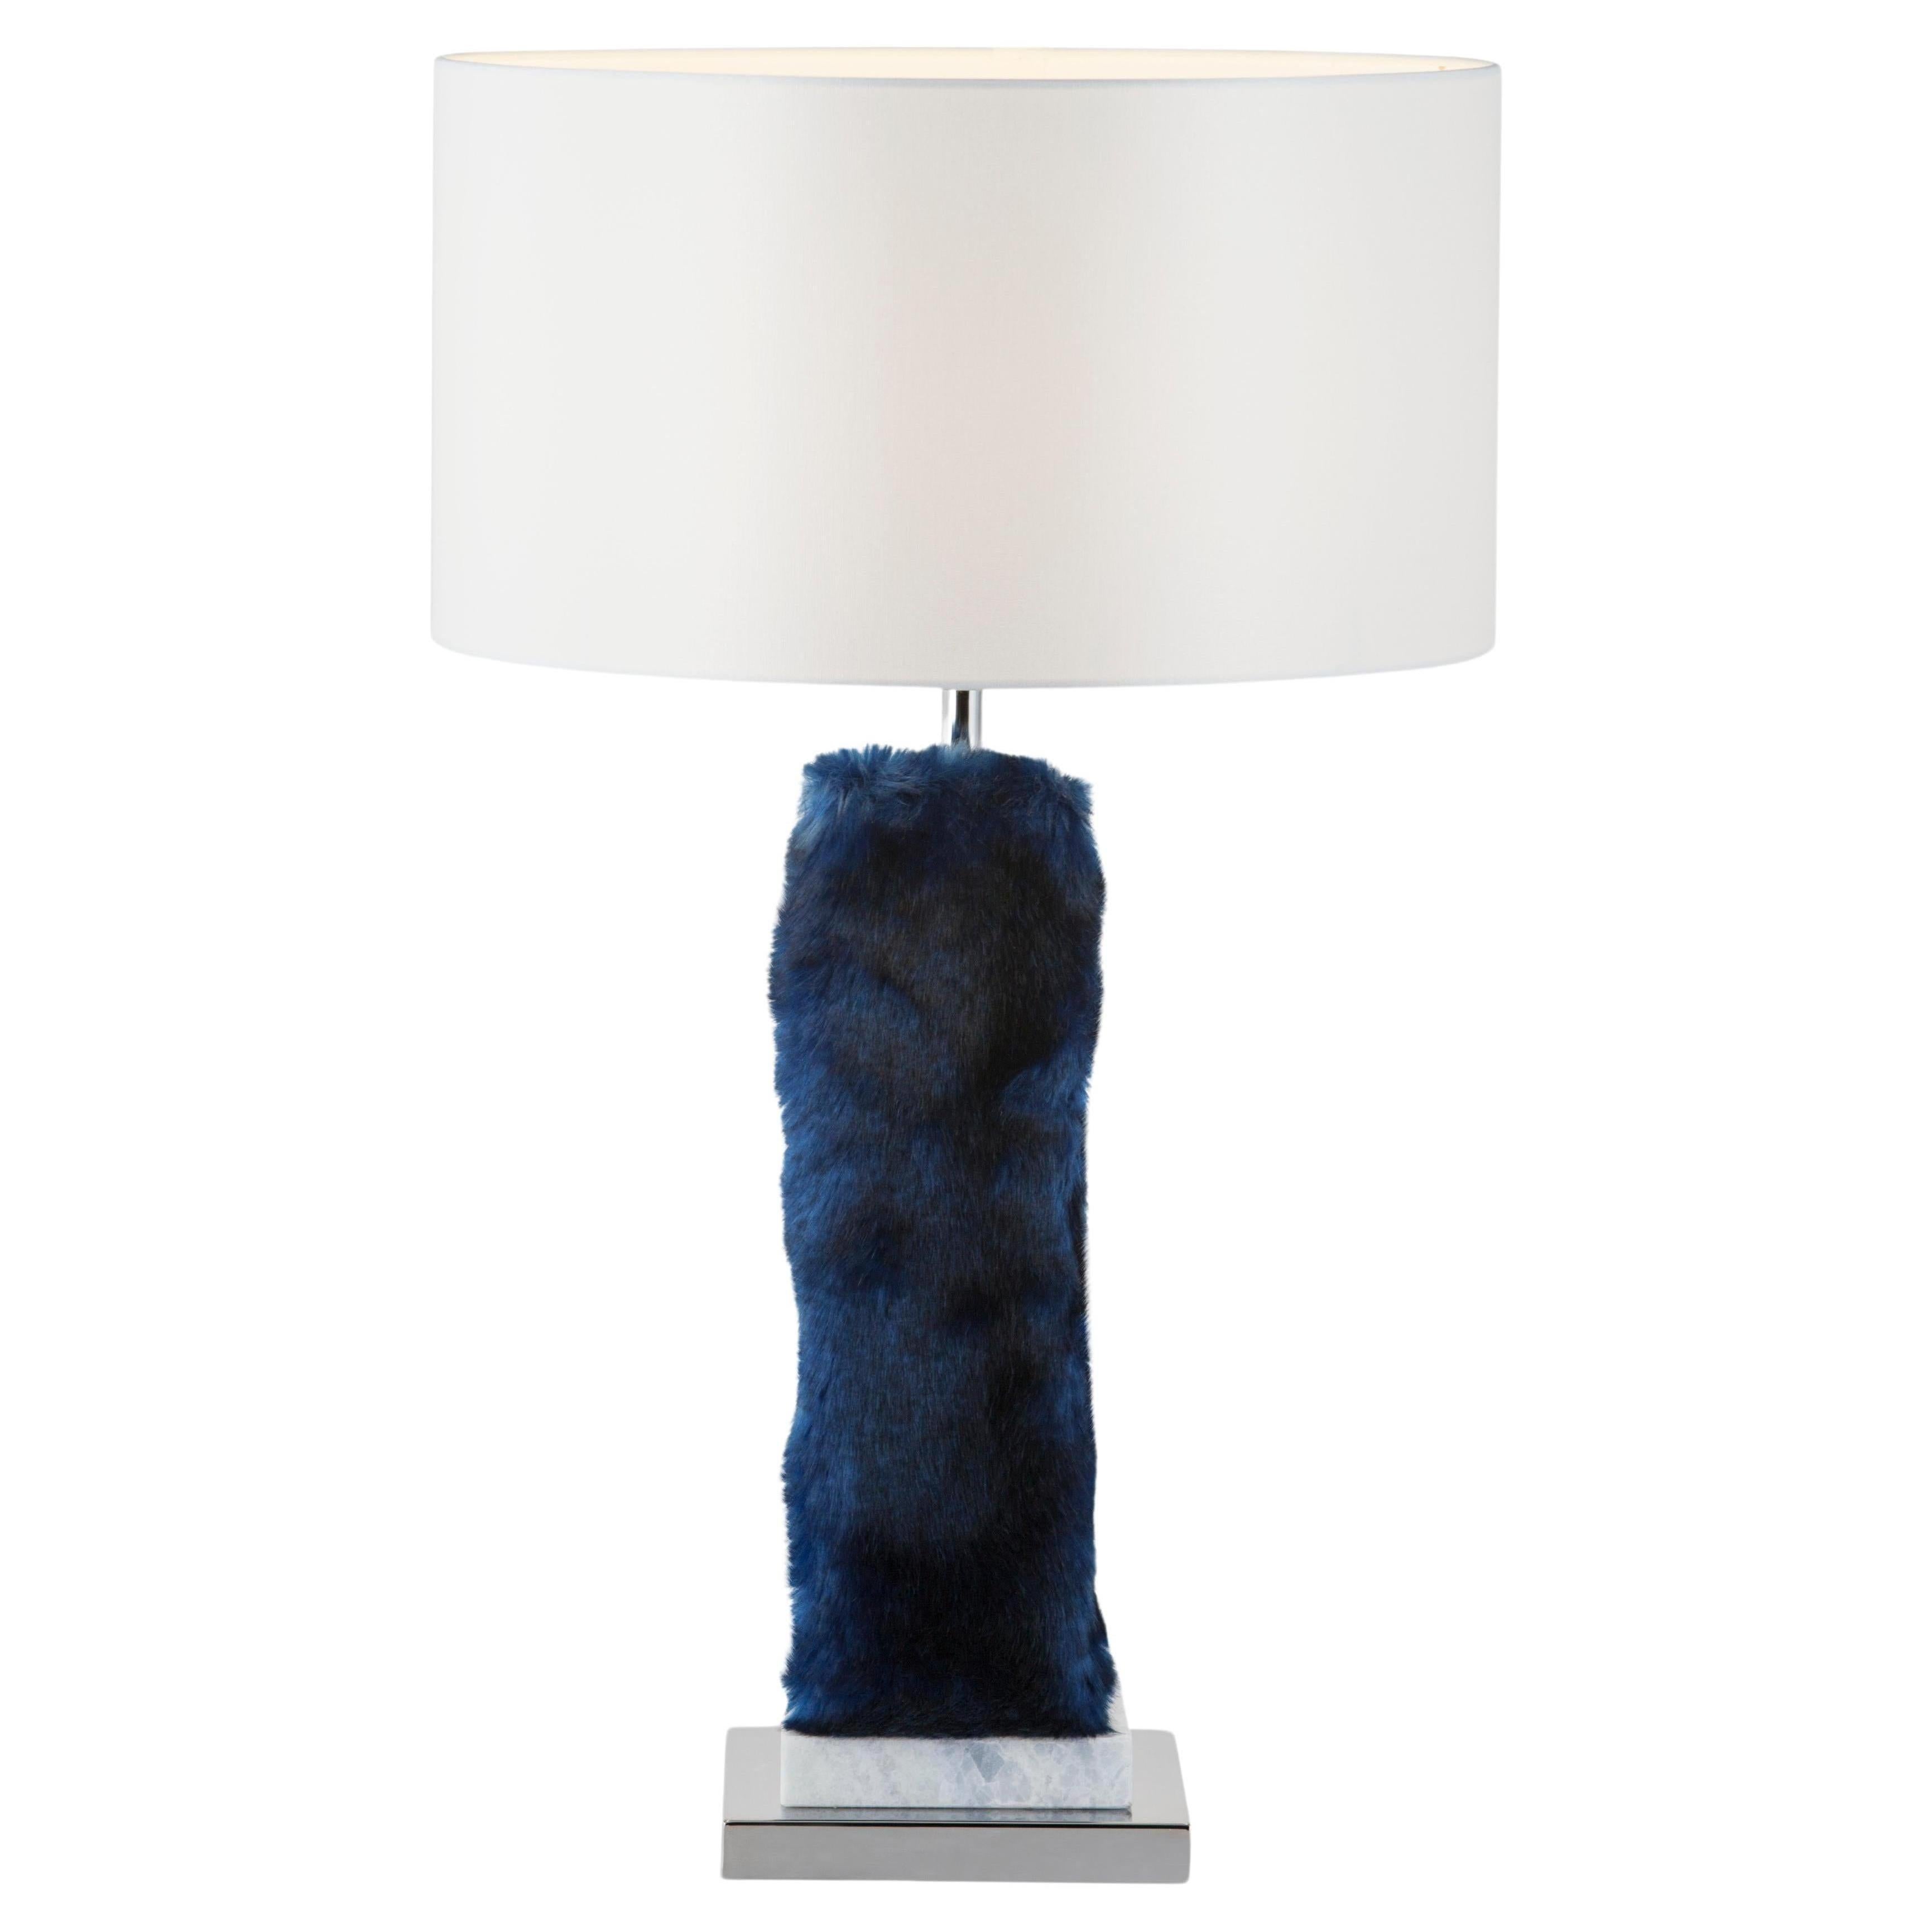 Set of 2 Simões table lamps, modern collection, handcrafted in Portugal - Europe by GF Modern.

Simões is an elegant table lamp and an attractive addition to a modern home. The Blue Crystal marble and stainless steel gracefully combine with the blue